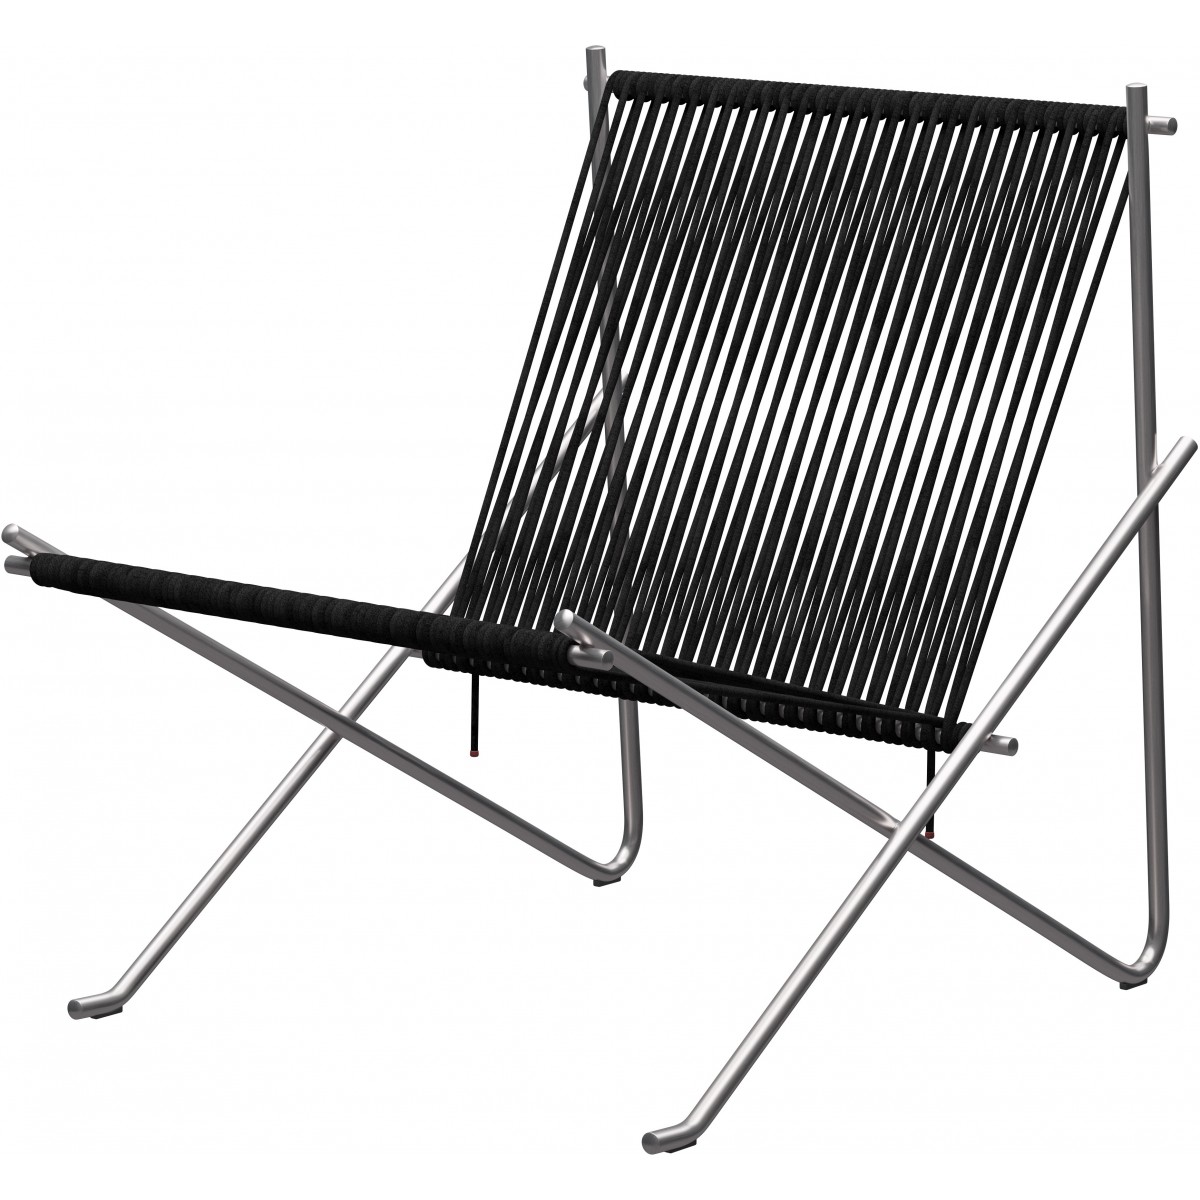 PK4 Lounge chair – Black steel stainless Brushed 